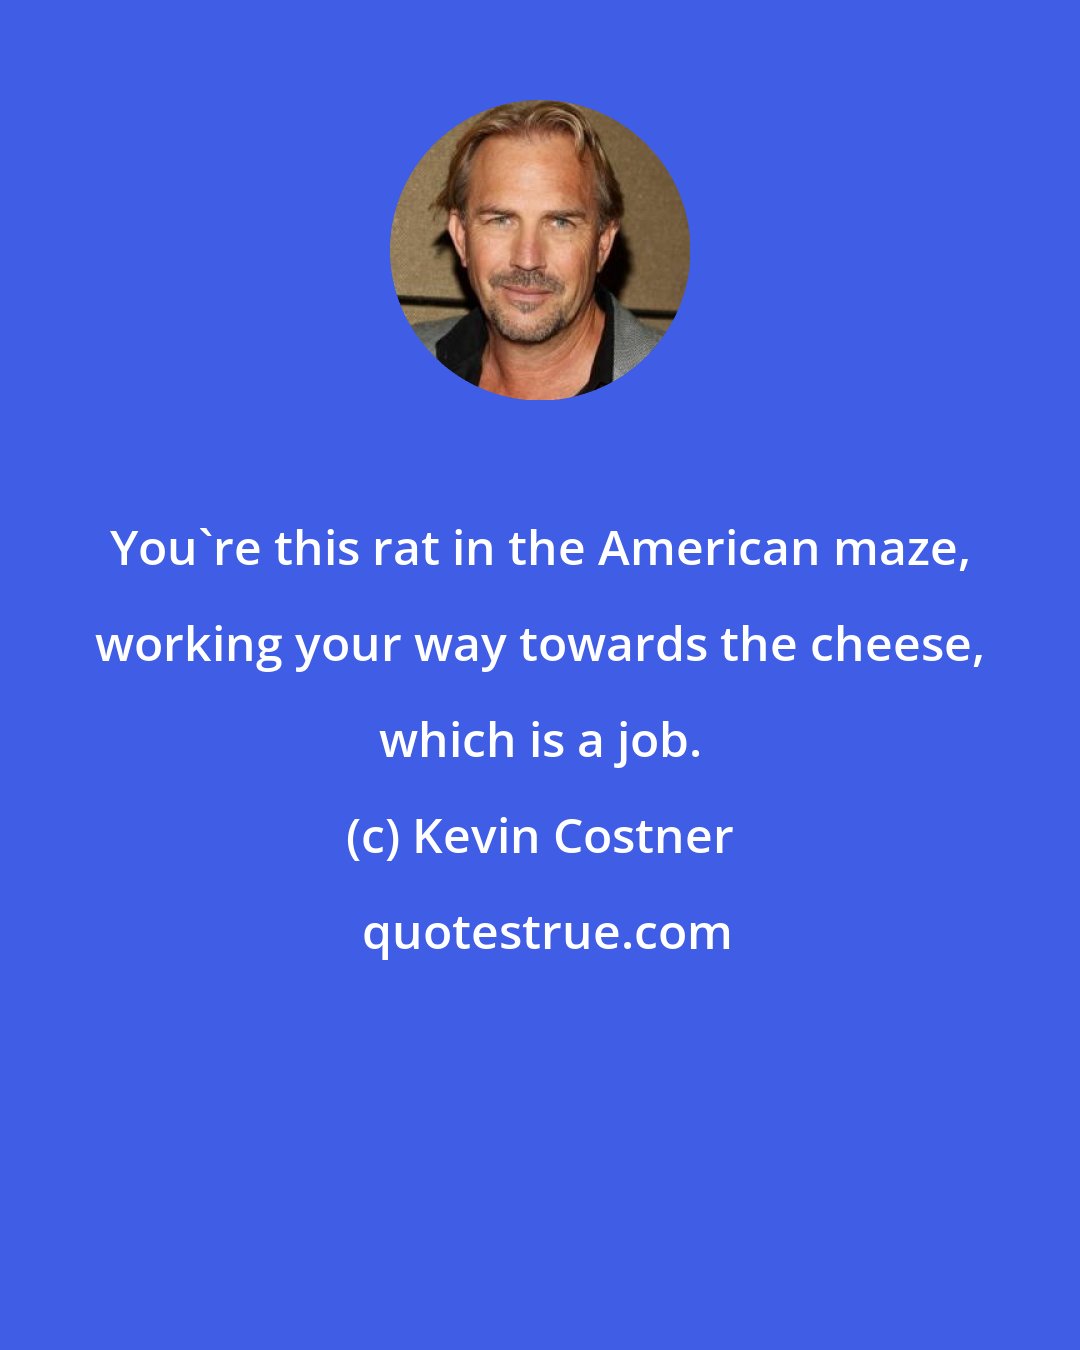 Kevin Costner: You're this rat in the American maze, working your way towards the cheese, which is a job.